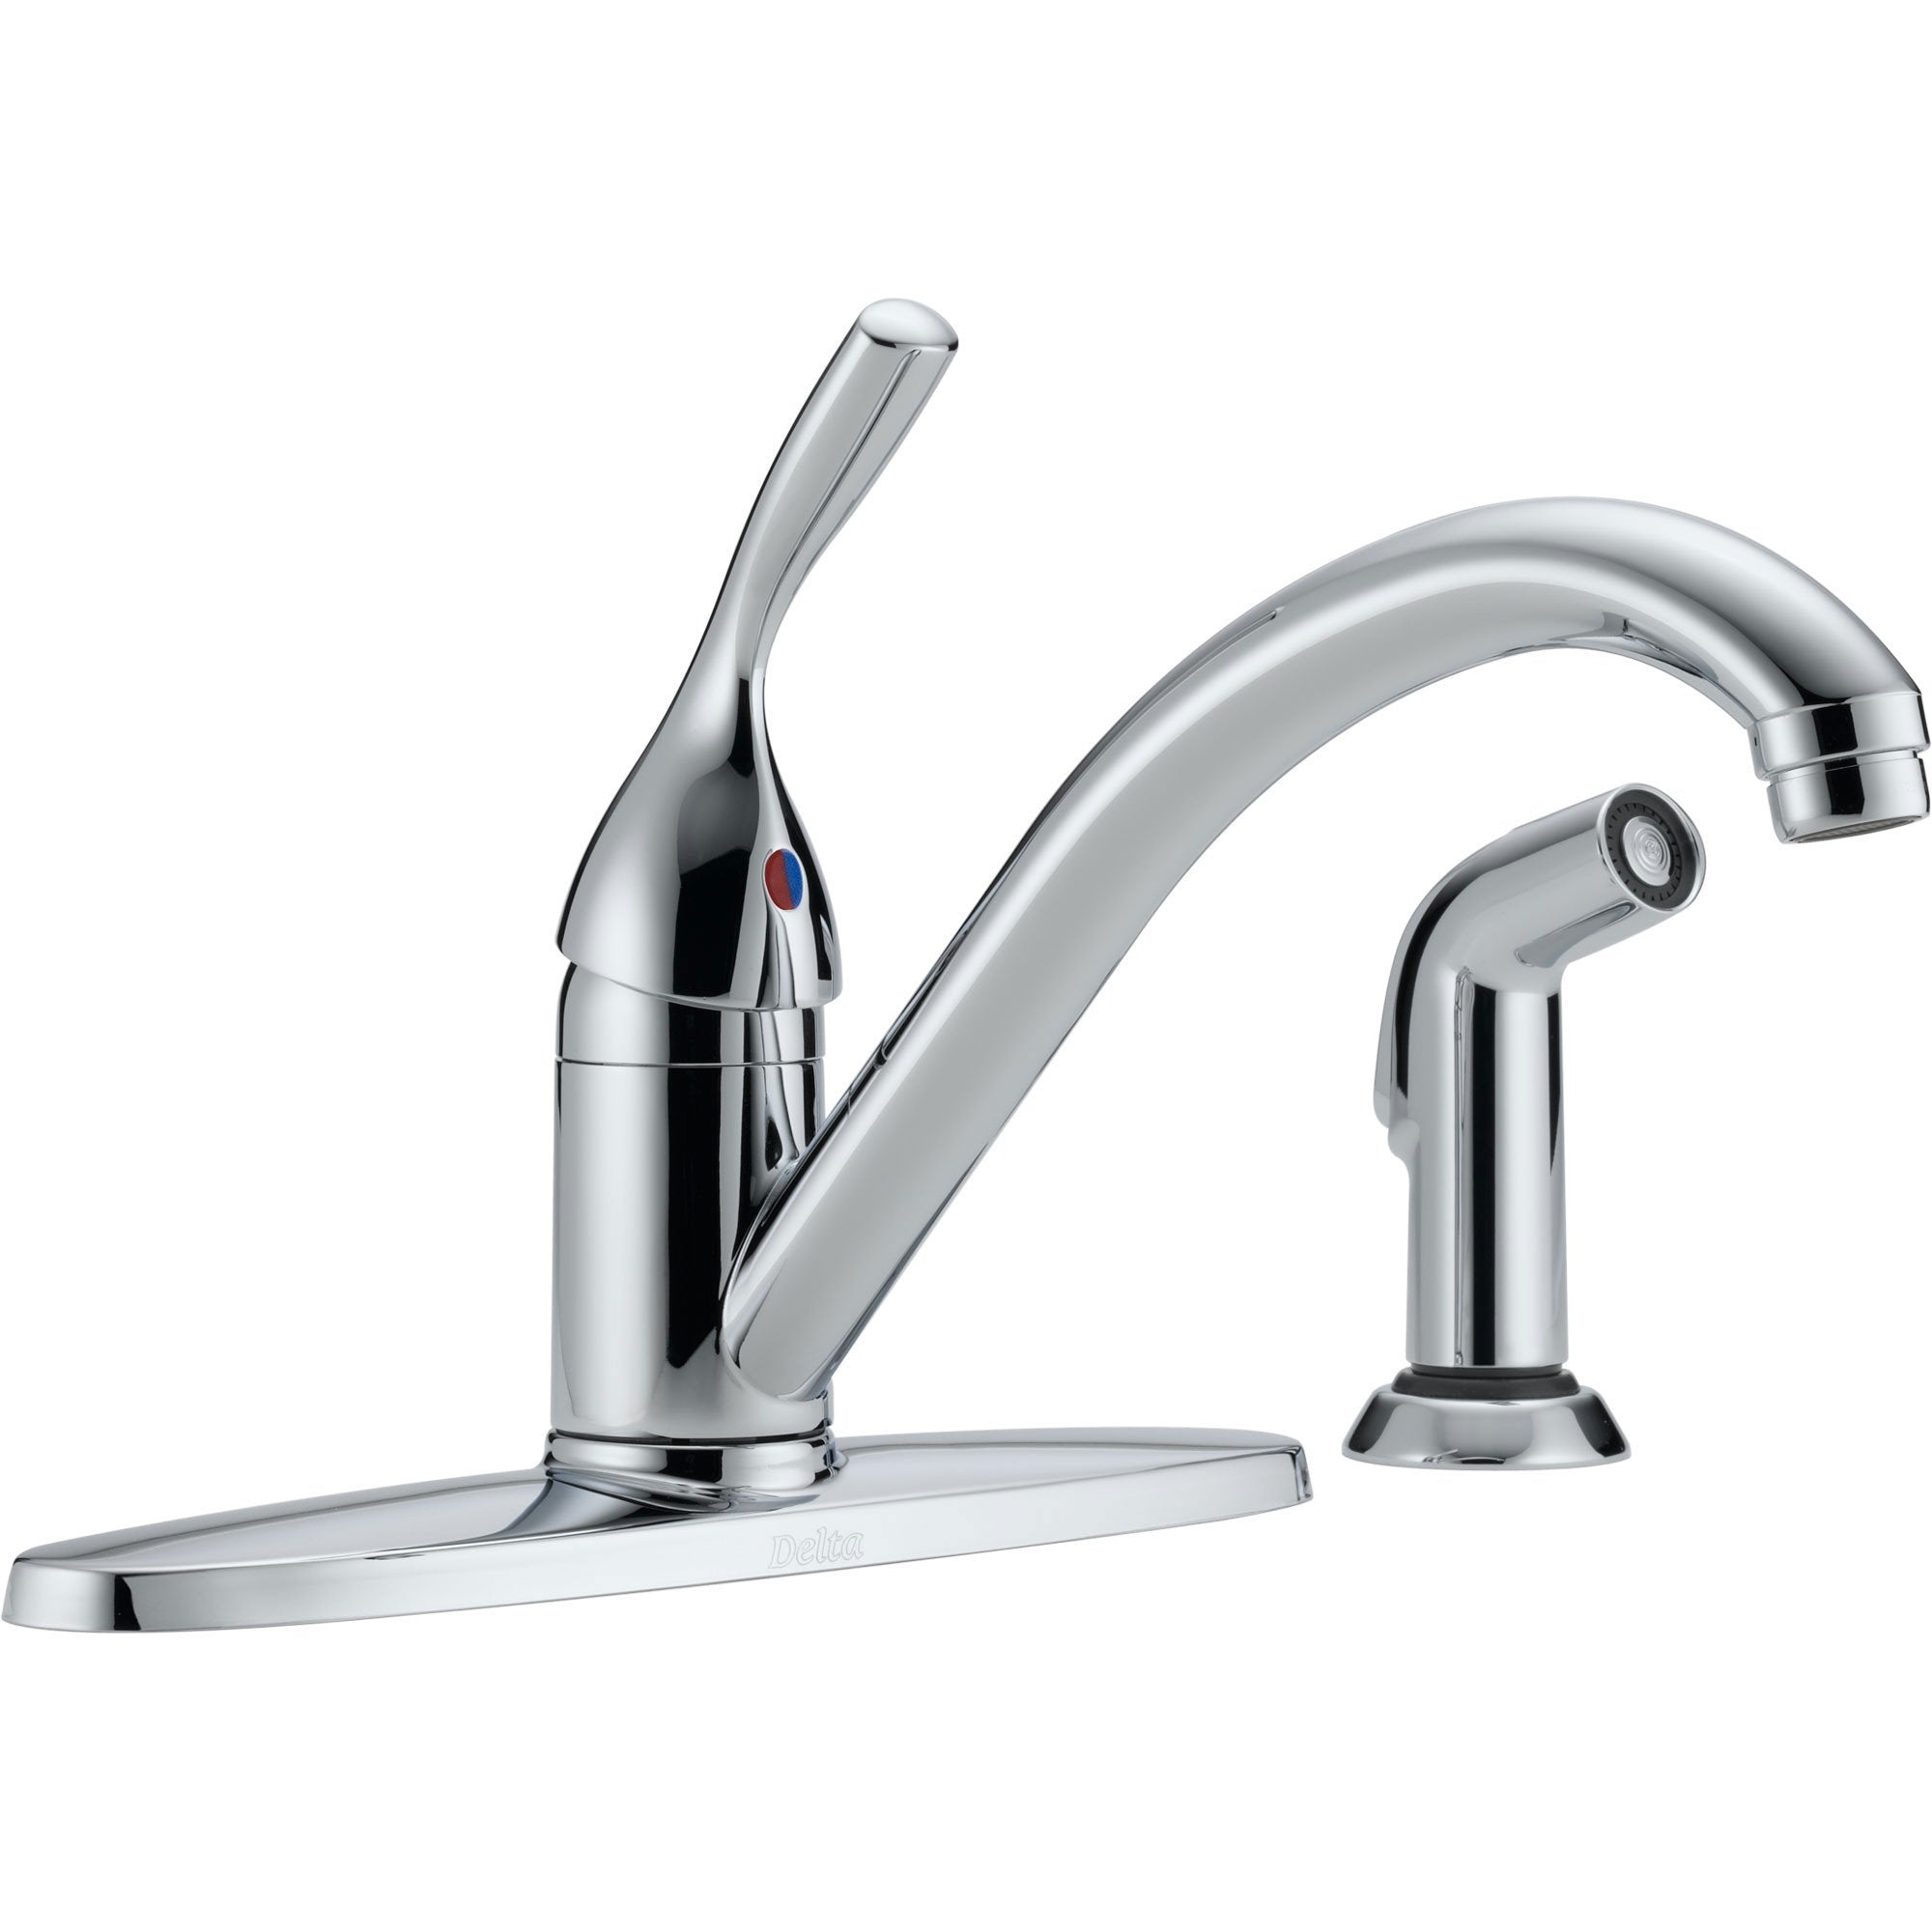 Delta Classic Single Handle Side Sprayer Modern Kitchen Faucet in Chrome 473786